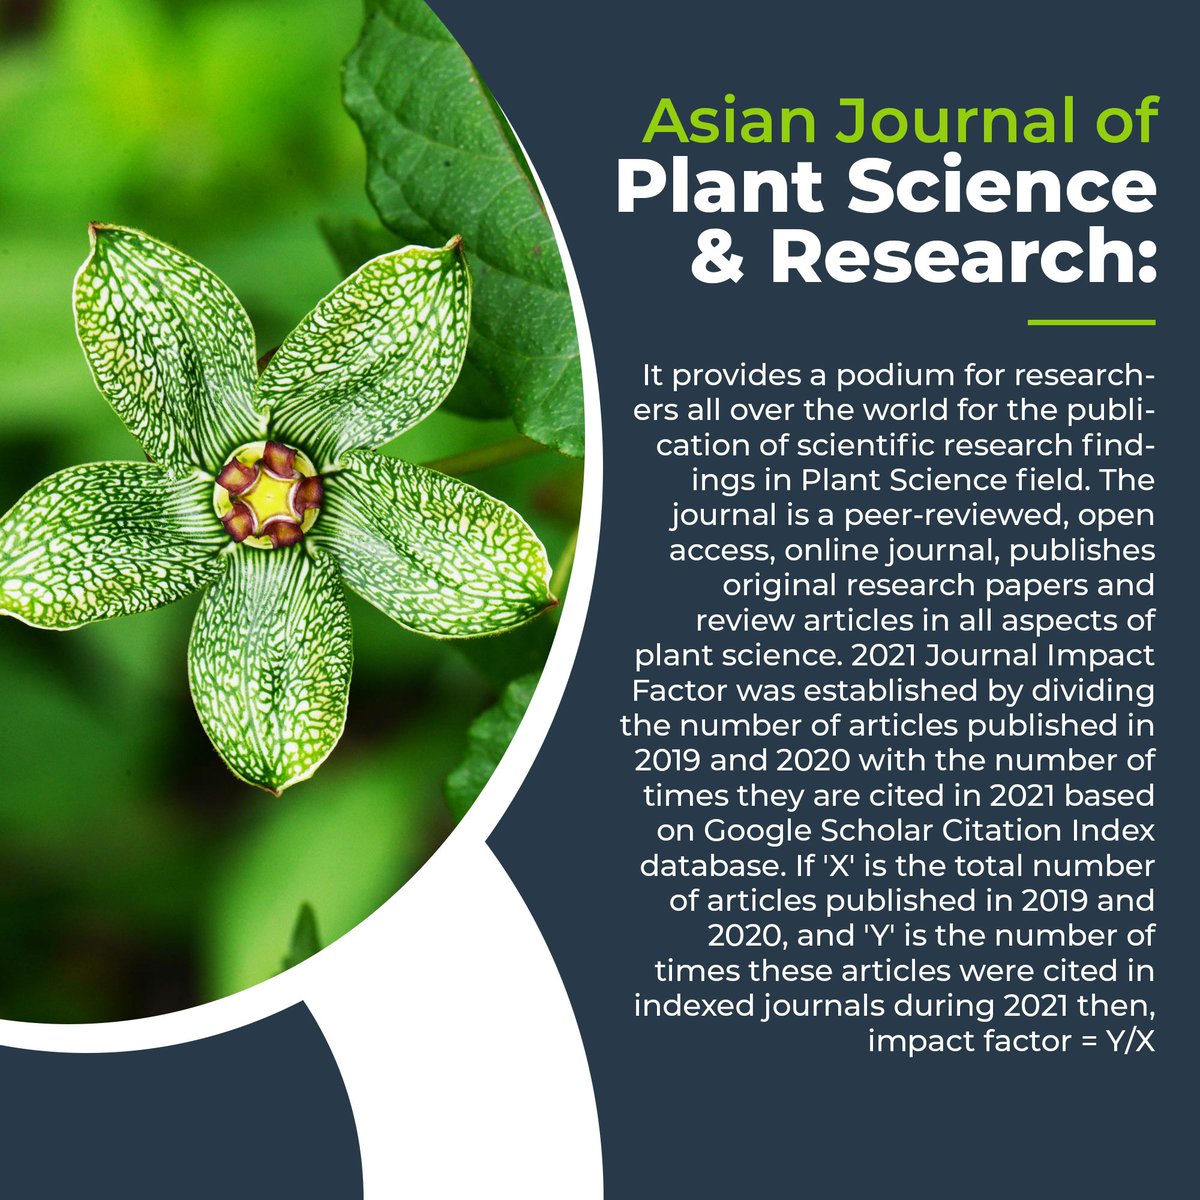 'Importance of Traditional Asian Medicinal Plants in Modern Medicine' 🌿 #AsianPlantScience #TraditionalMedicine. 'Enhancing Crop Yields in Asia through Sustainable Farming Practices' 🌾

 #AgriculturalResearch #CropYields #ESPNED